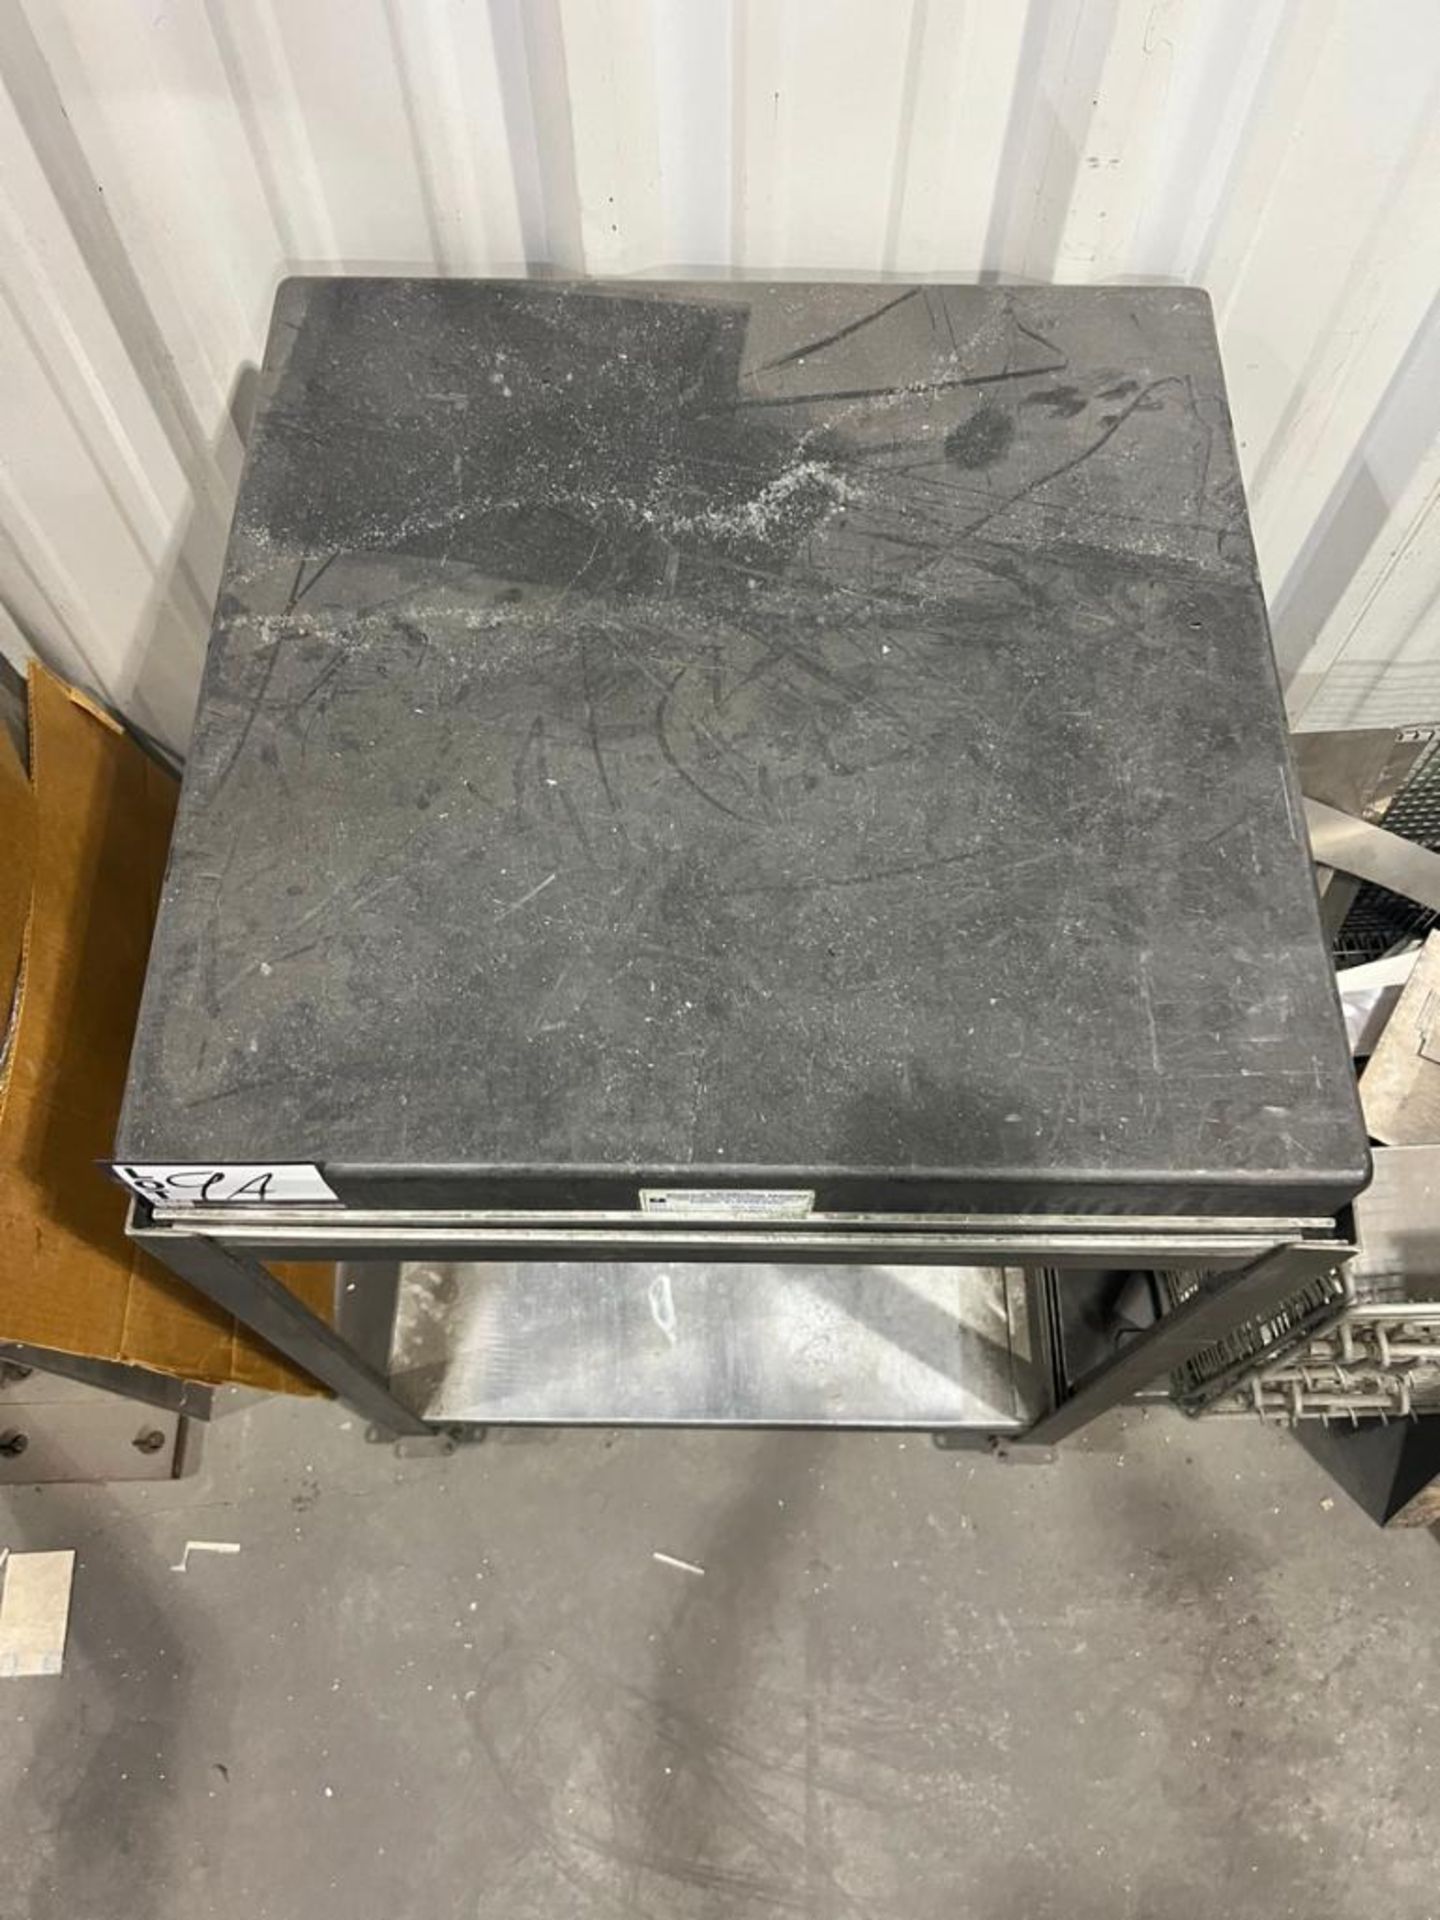 24"x24"x3-1/4" Granite Surface Plate with Rolling Base - Image 3 of 3